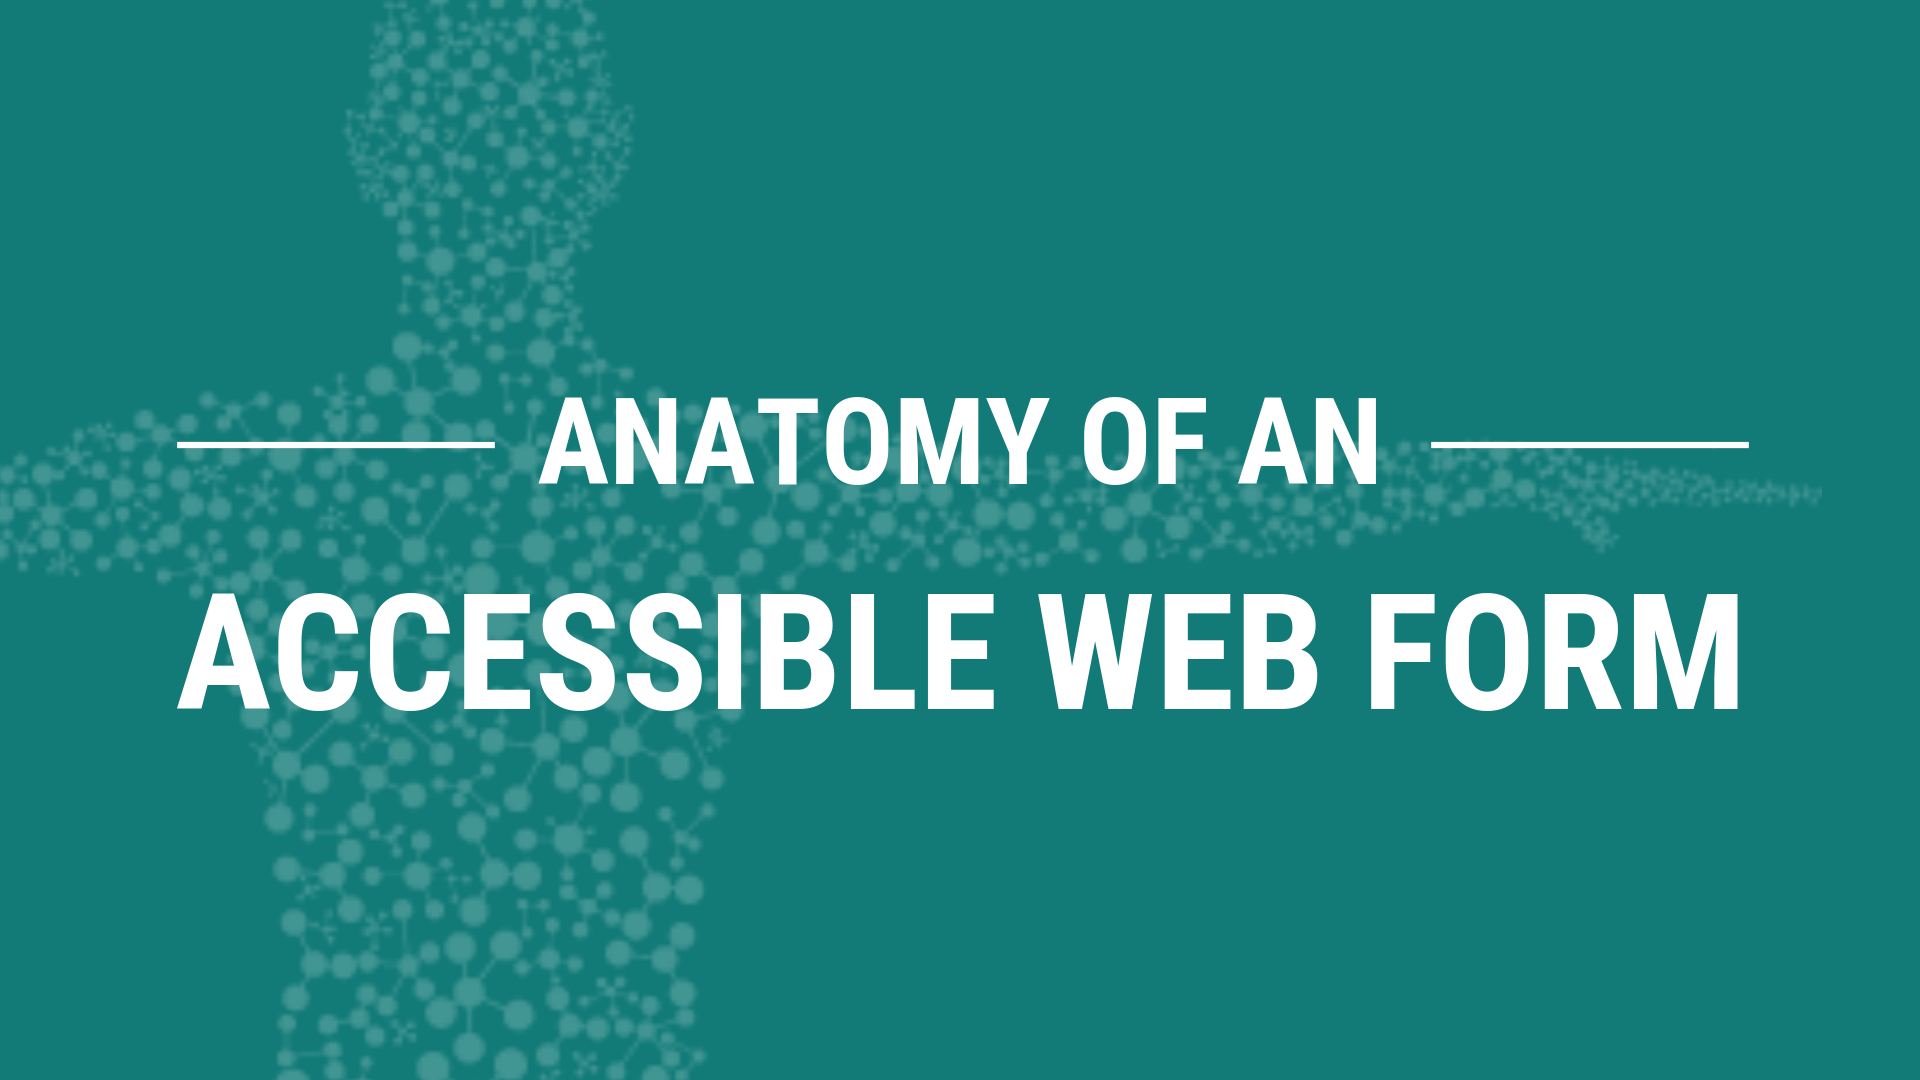 Anatomy Of An Accessible Web Form [INFOGRAPHIC]